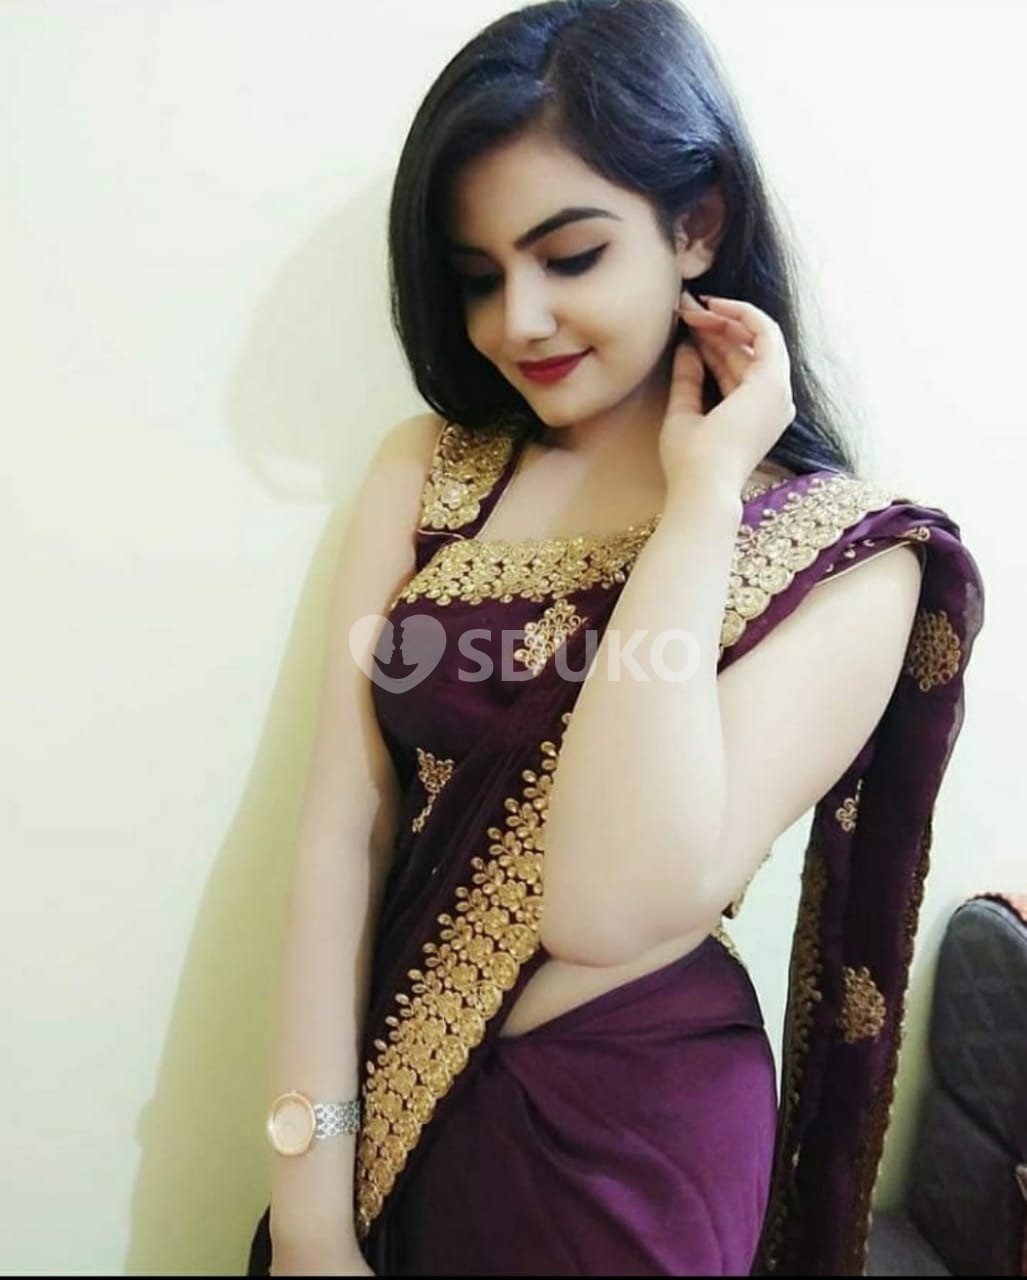 Amritsar ☎️ VIP LOW PRICE ESCORT FULL HARD FUCK WITH NAUGHTY IF YOU WANT TO FUCK MY PUSSY WITH BIG BOOBS GIRLS- CALL